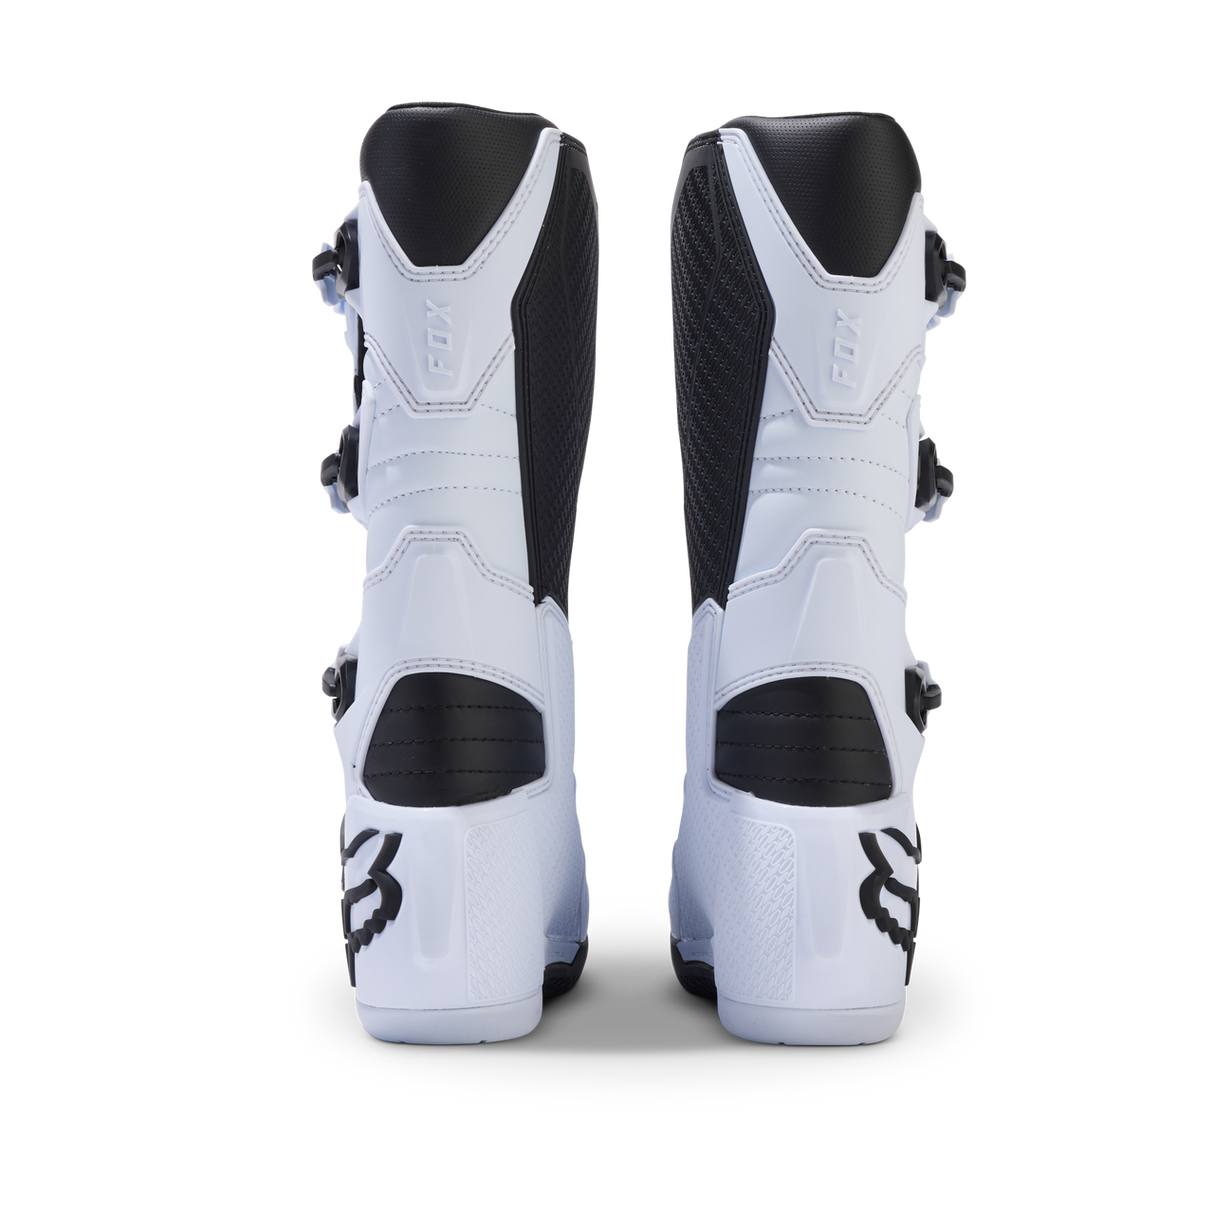 Fox Youth Comp Boots White